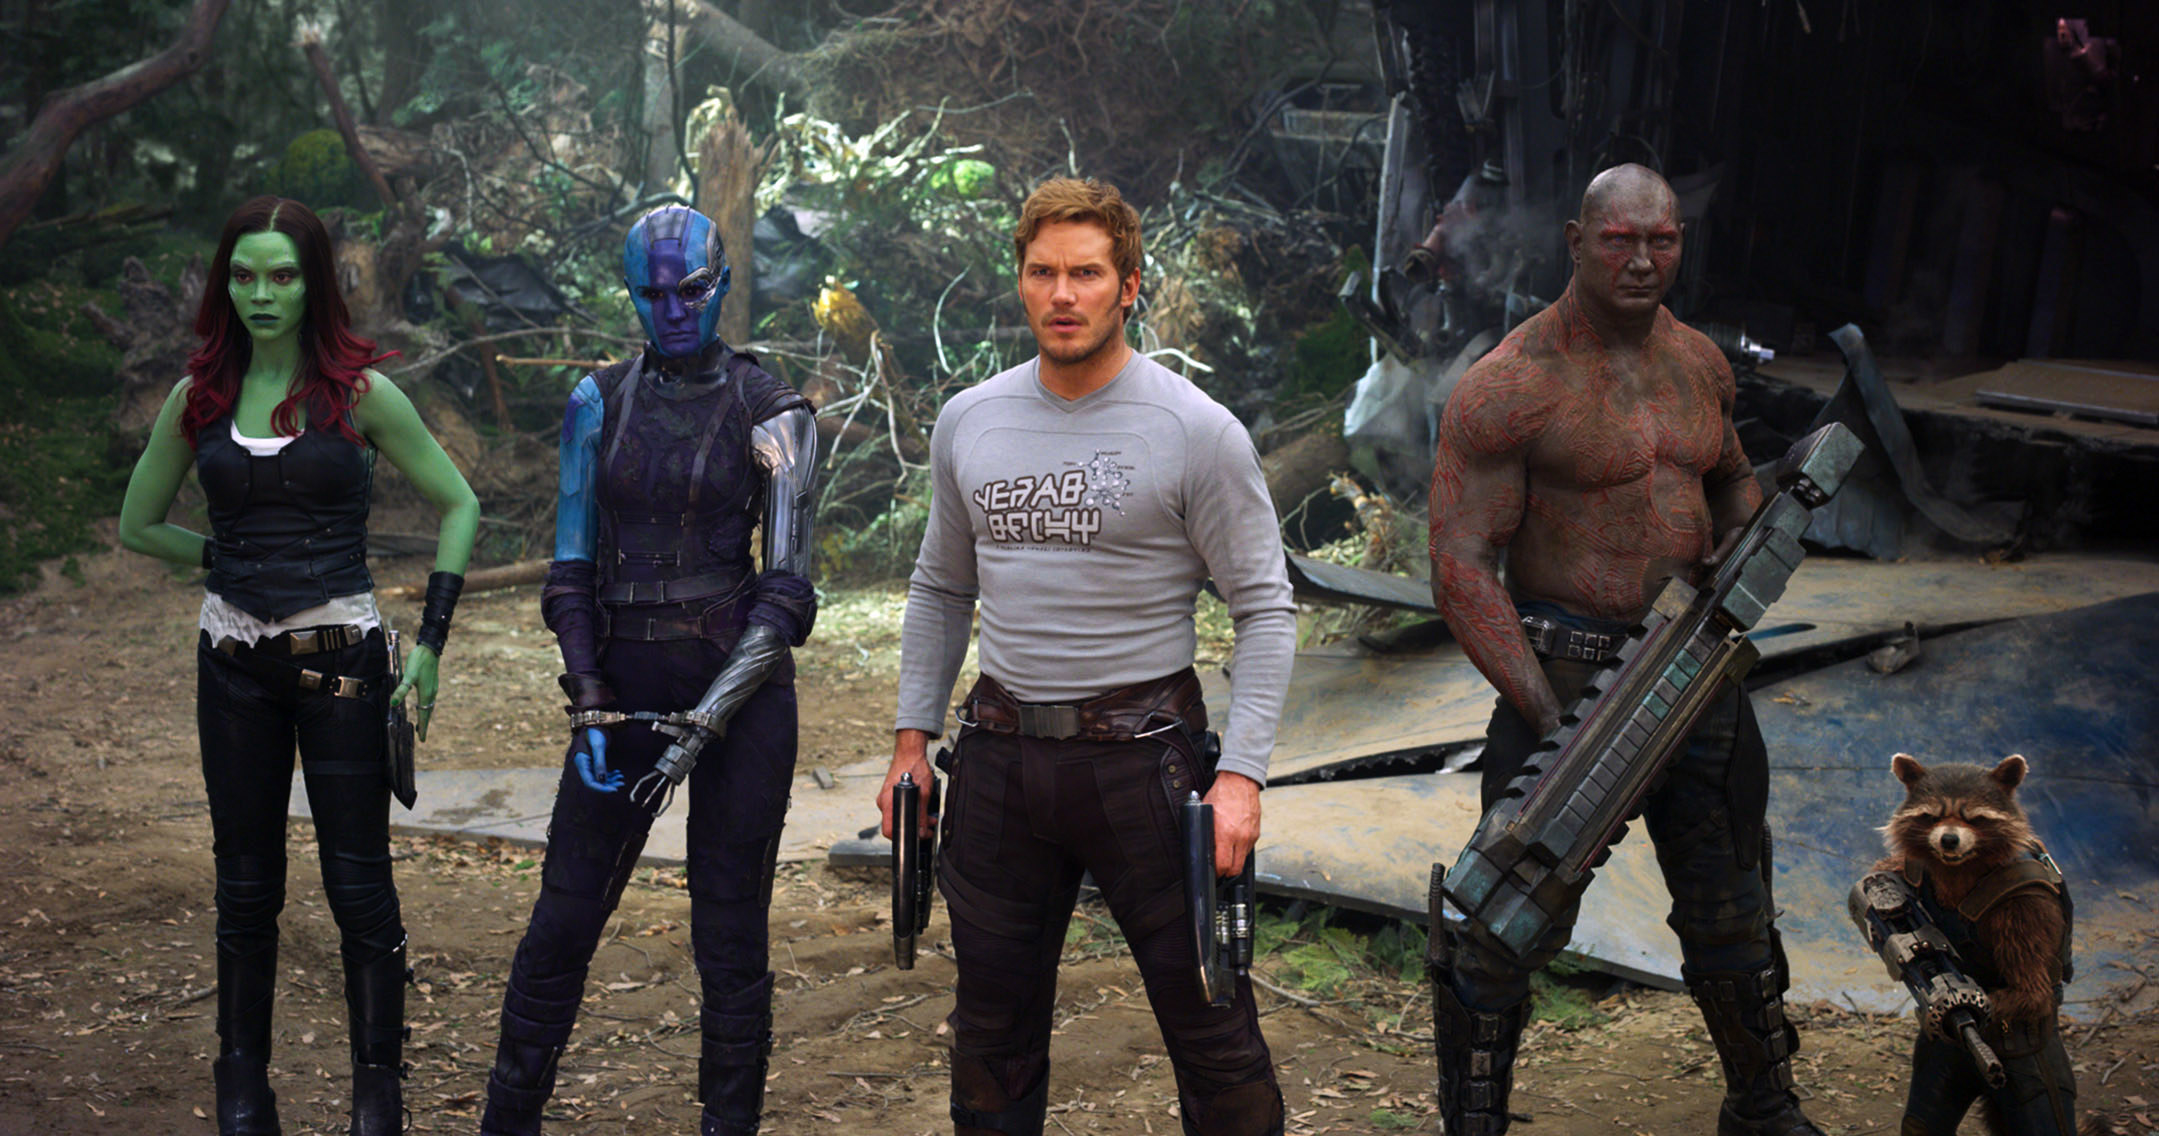 The guardians of the galaxy stand together, triumphant